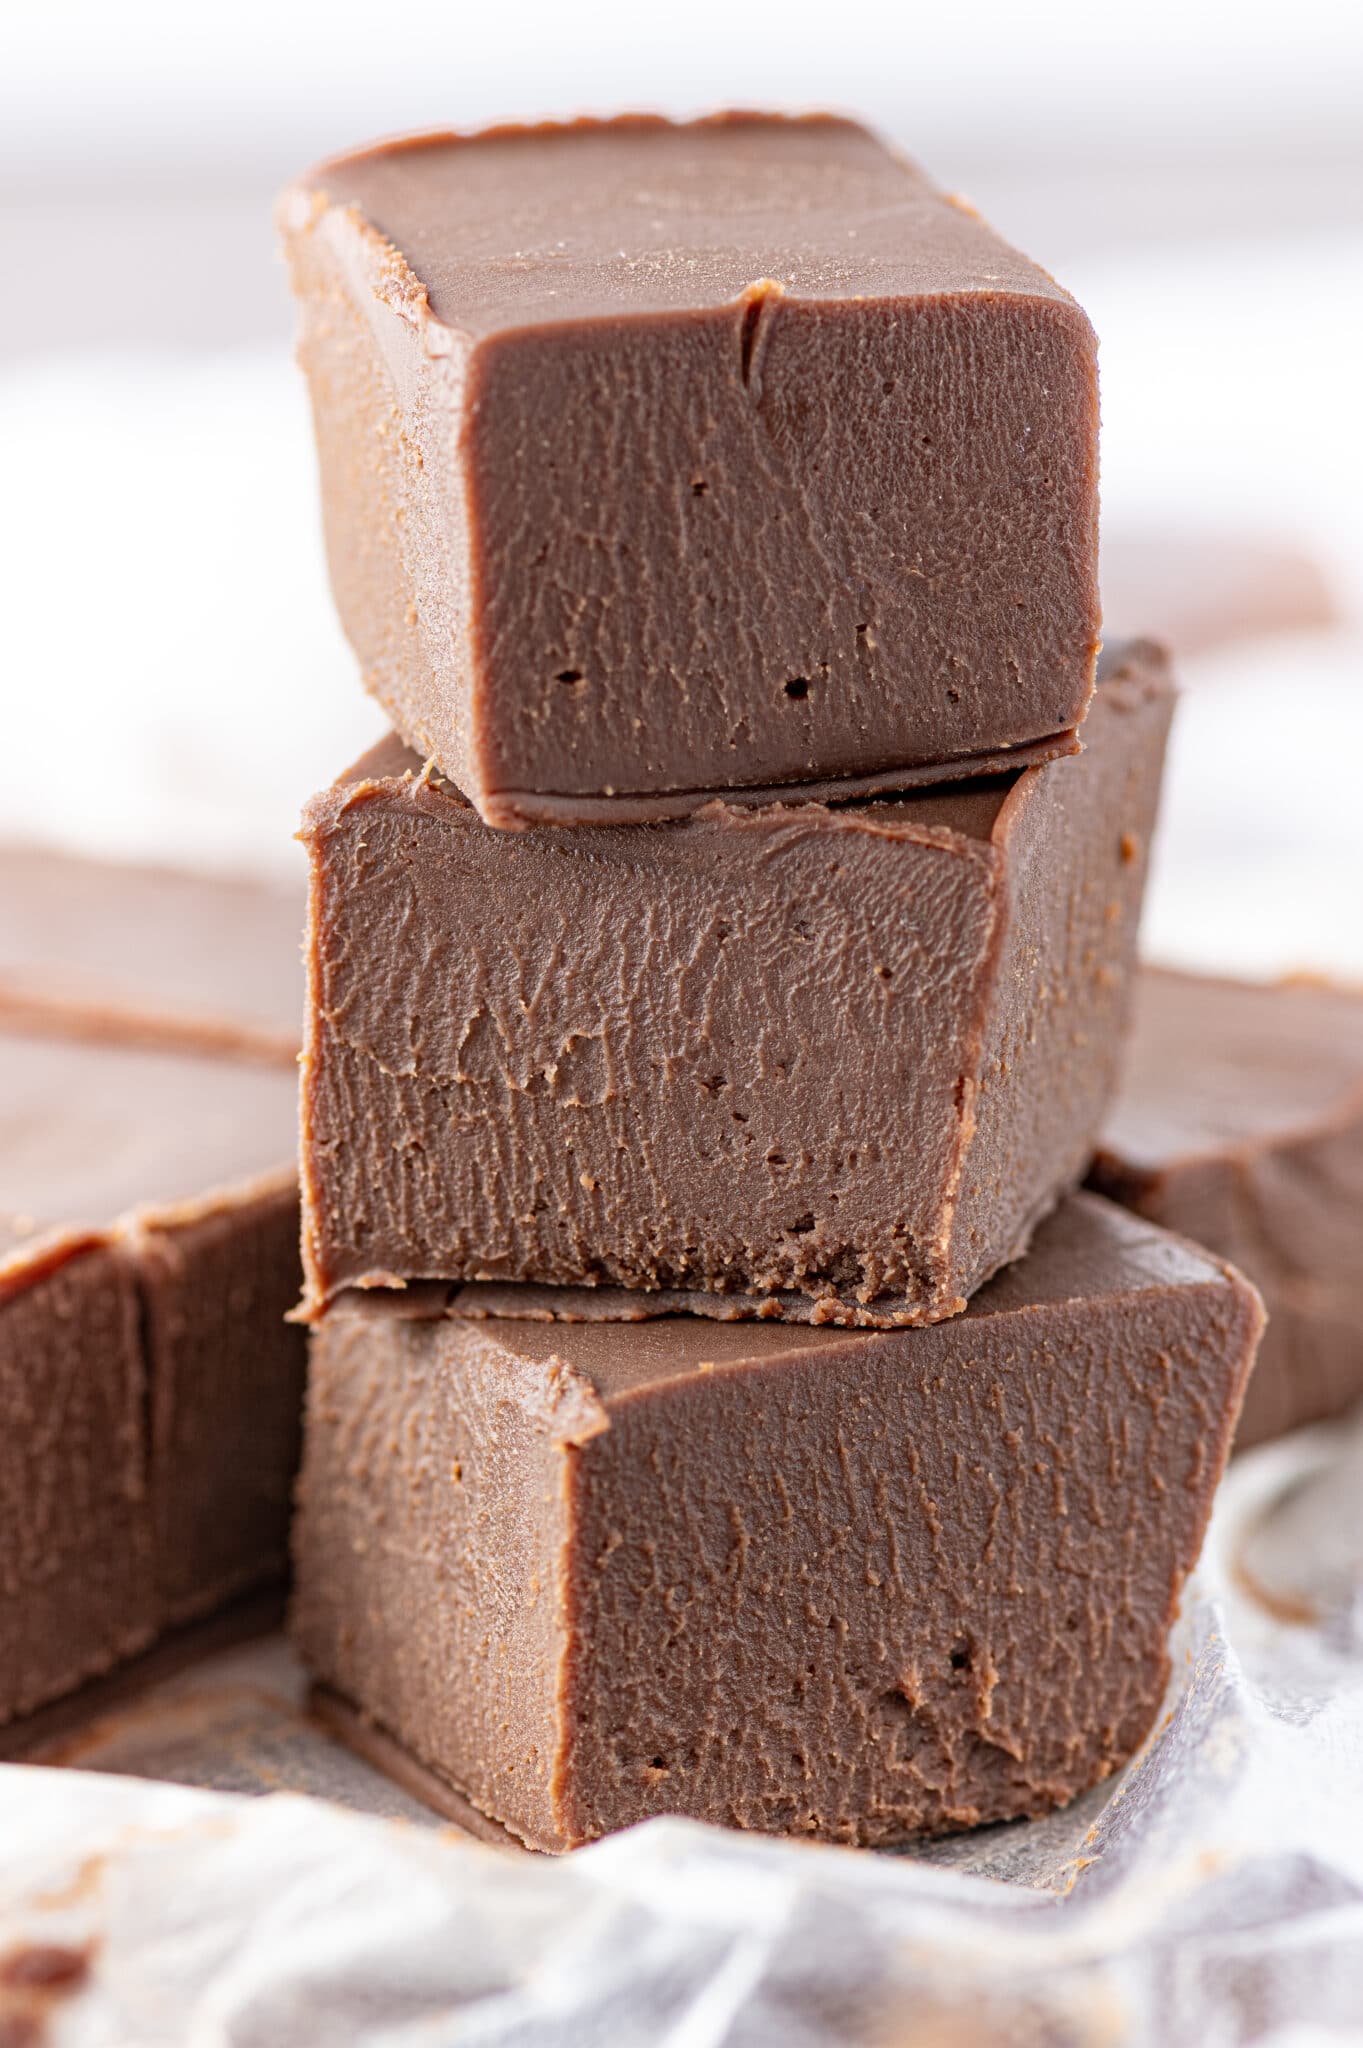 A stack of three pieces of chocolate keto fudge made with this recipe against a bright white background.